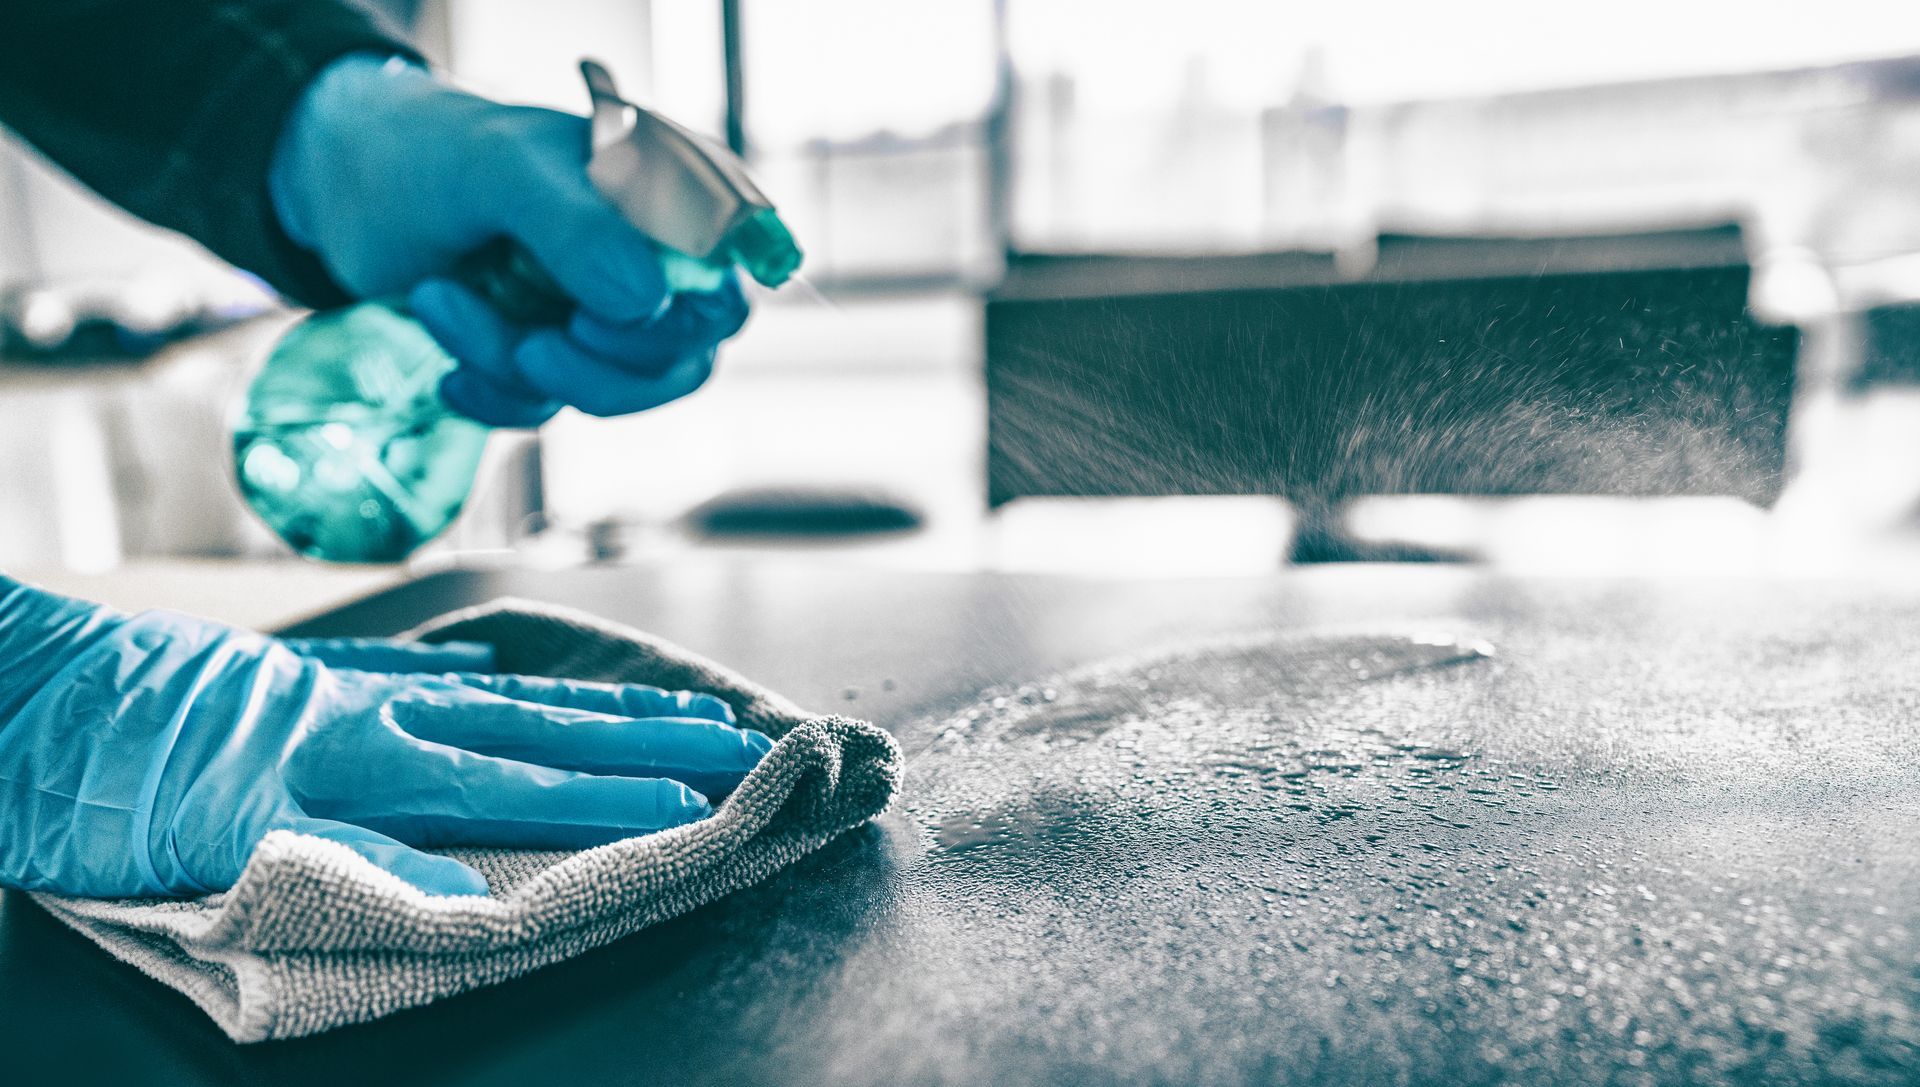 a person wearing blue gloves is cleaning a table with a cloth and spray bottle